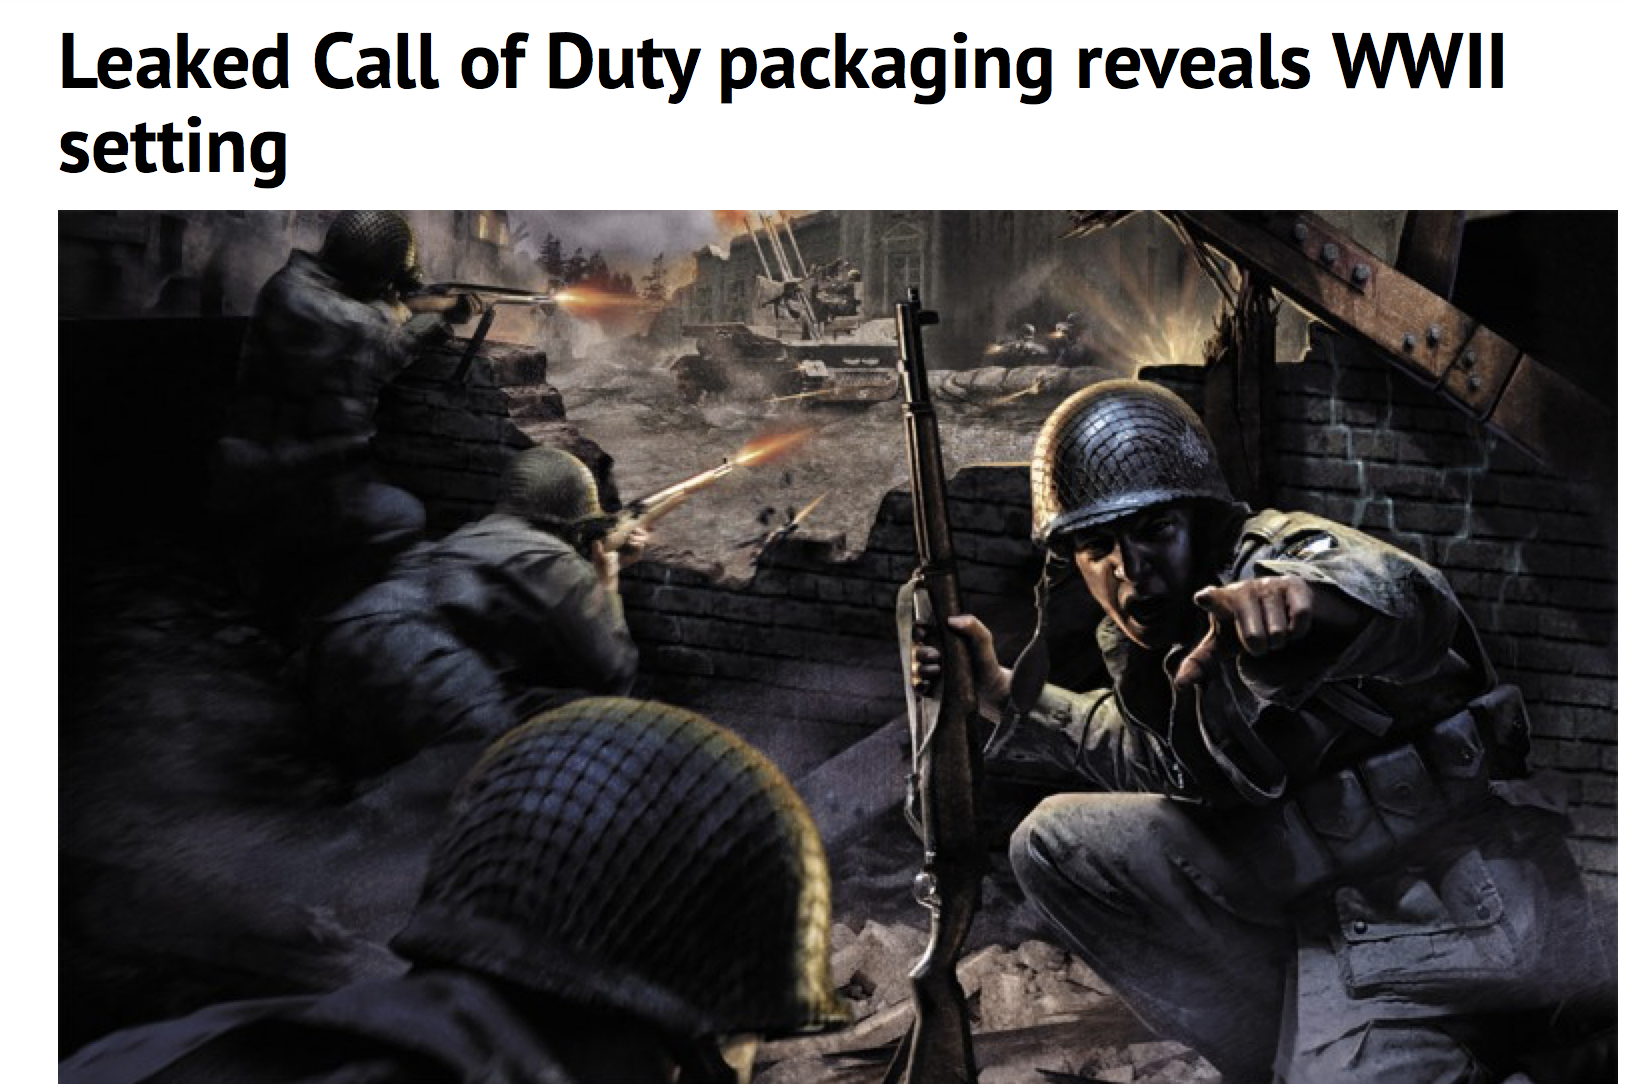 Follow up NEWS on Call of Duty newest Game going Back to WWII